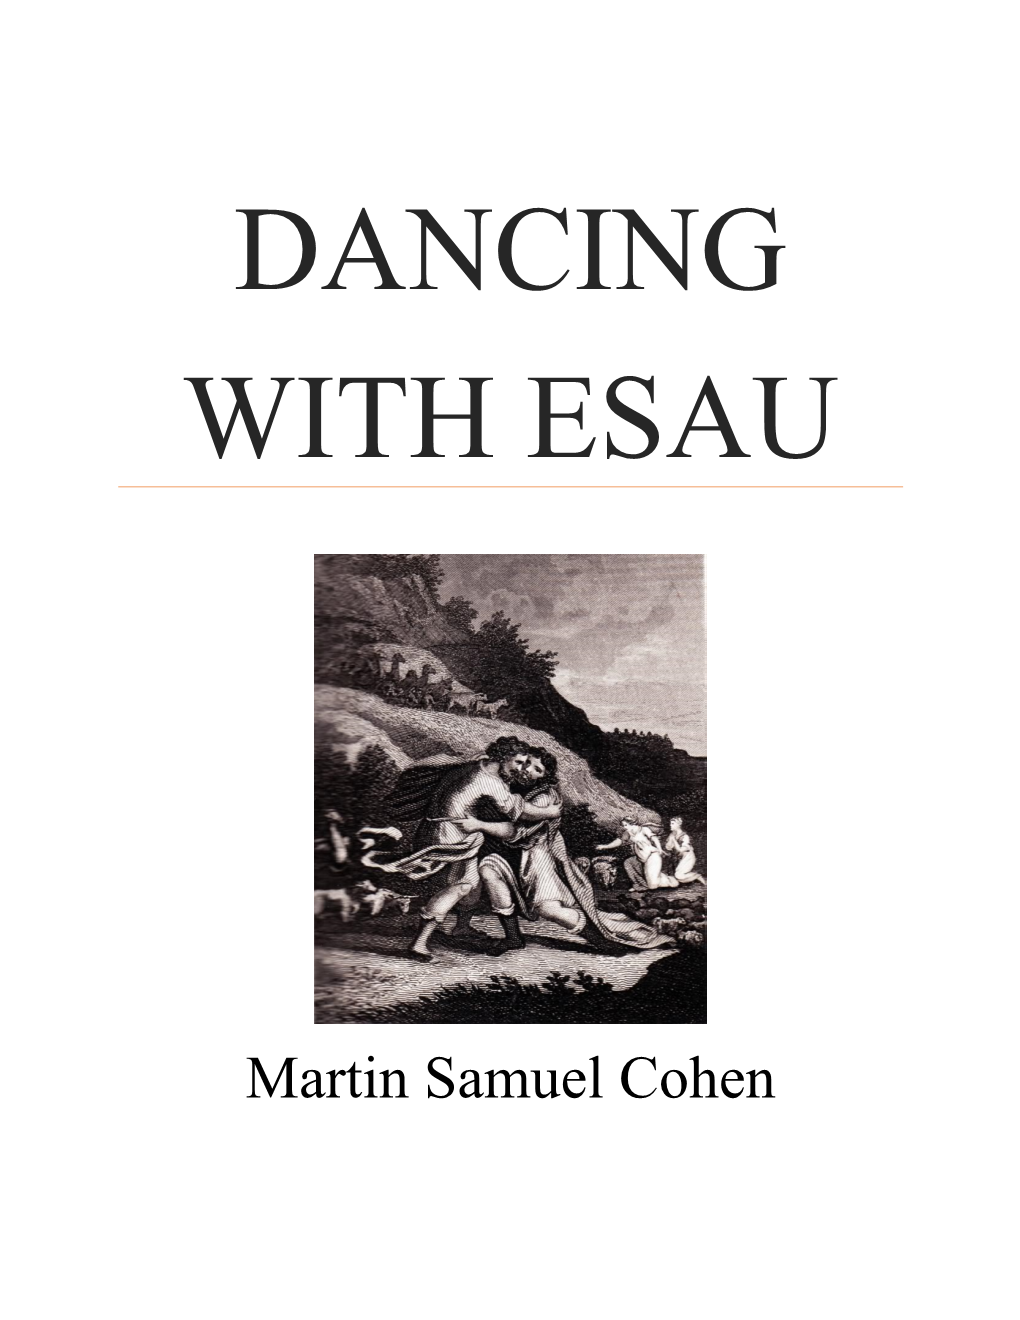 Dancing with Esau